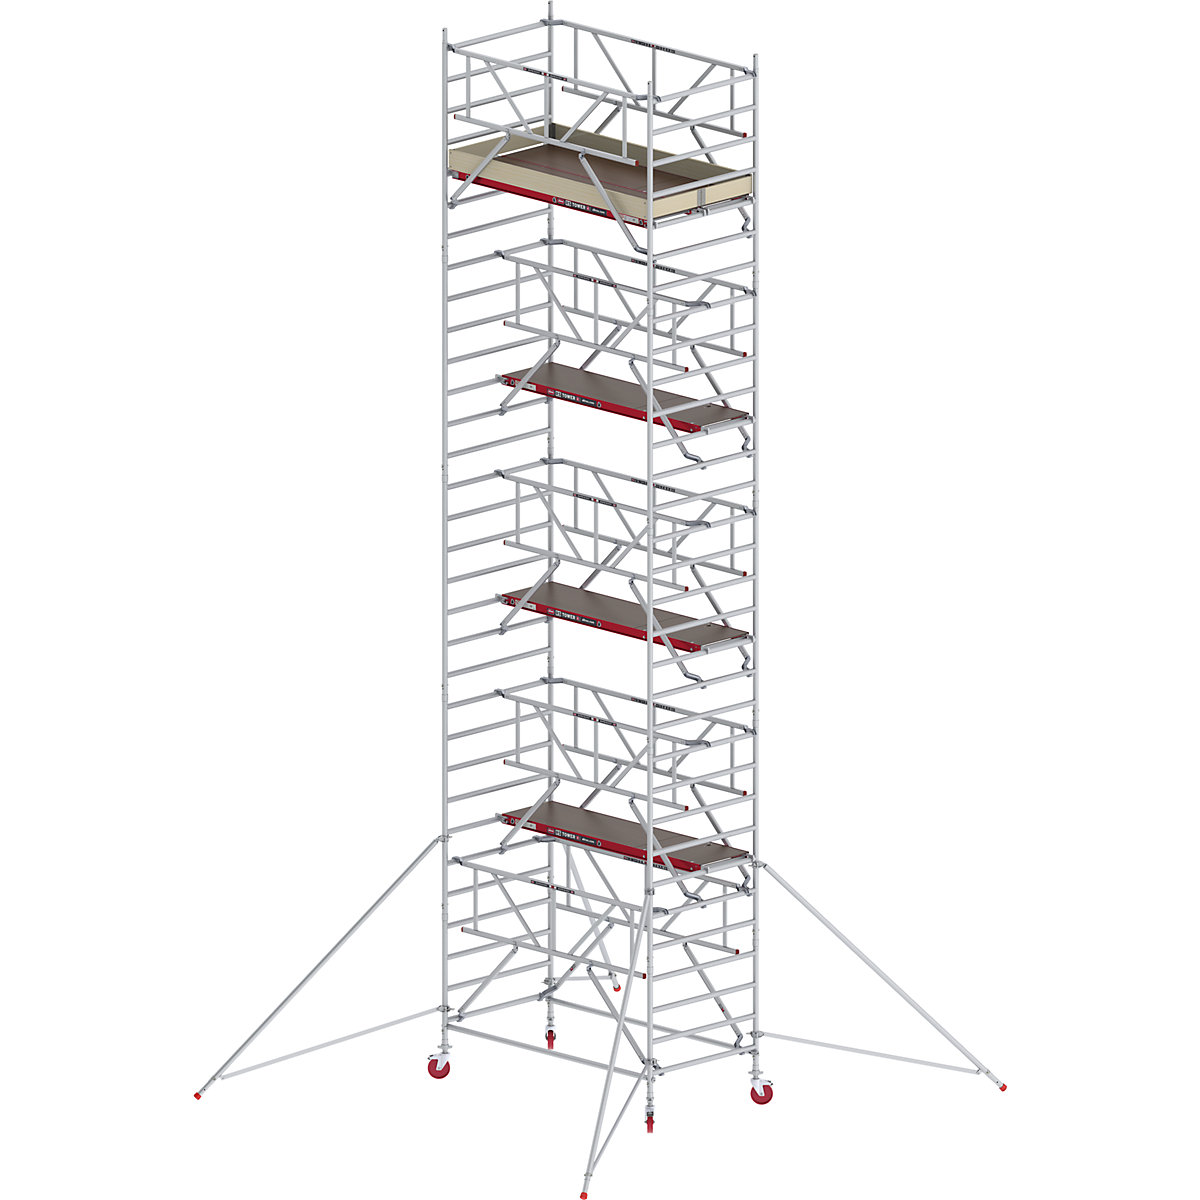 RS TOWER 42 wide mobile access tower with Safe-Quick® – Altrex, wooden platform, length 2.45 m, working height 10.20 m-2